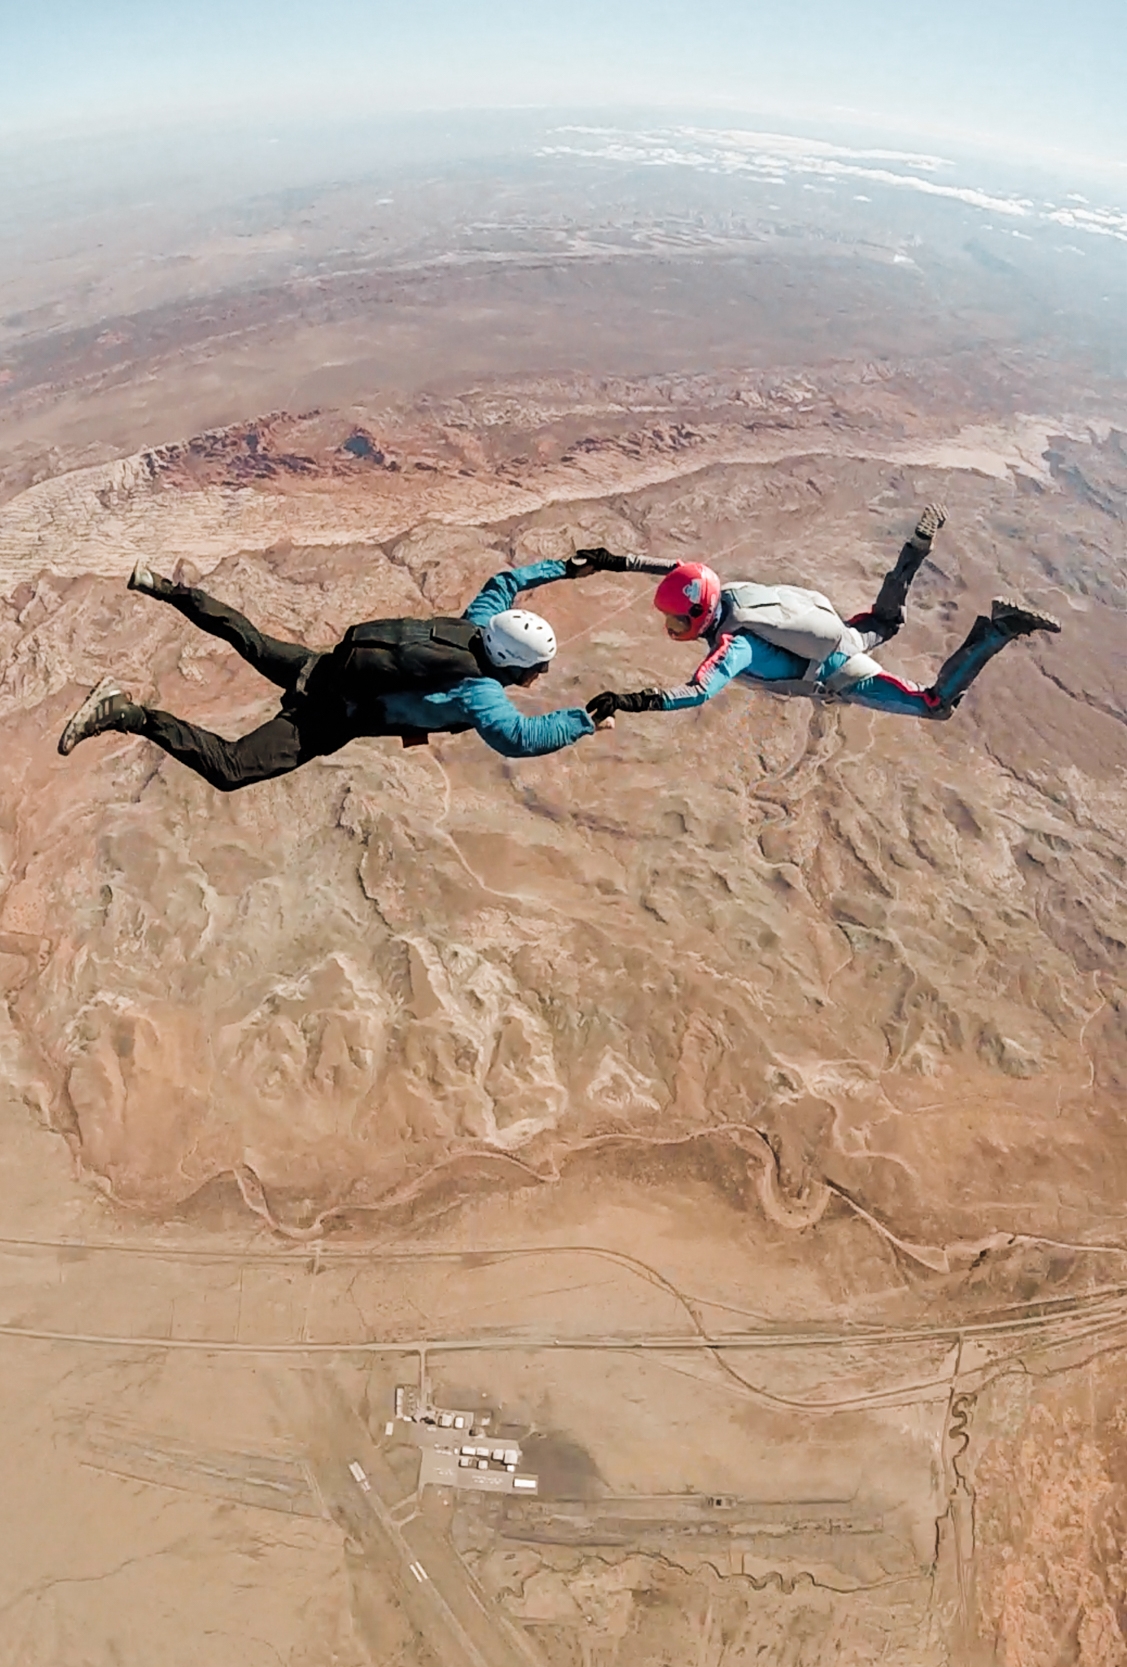 skydiving in moab, utah | utah and california adventure elopement photographers | the hearnes adventure photography | www.thehearnes.com